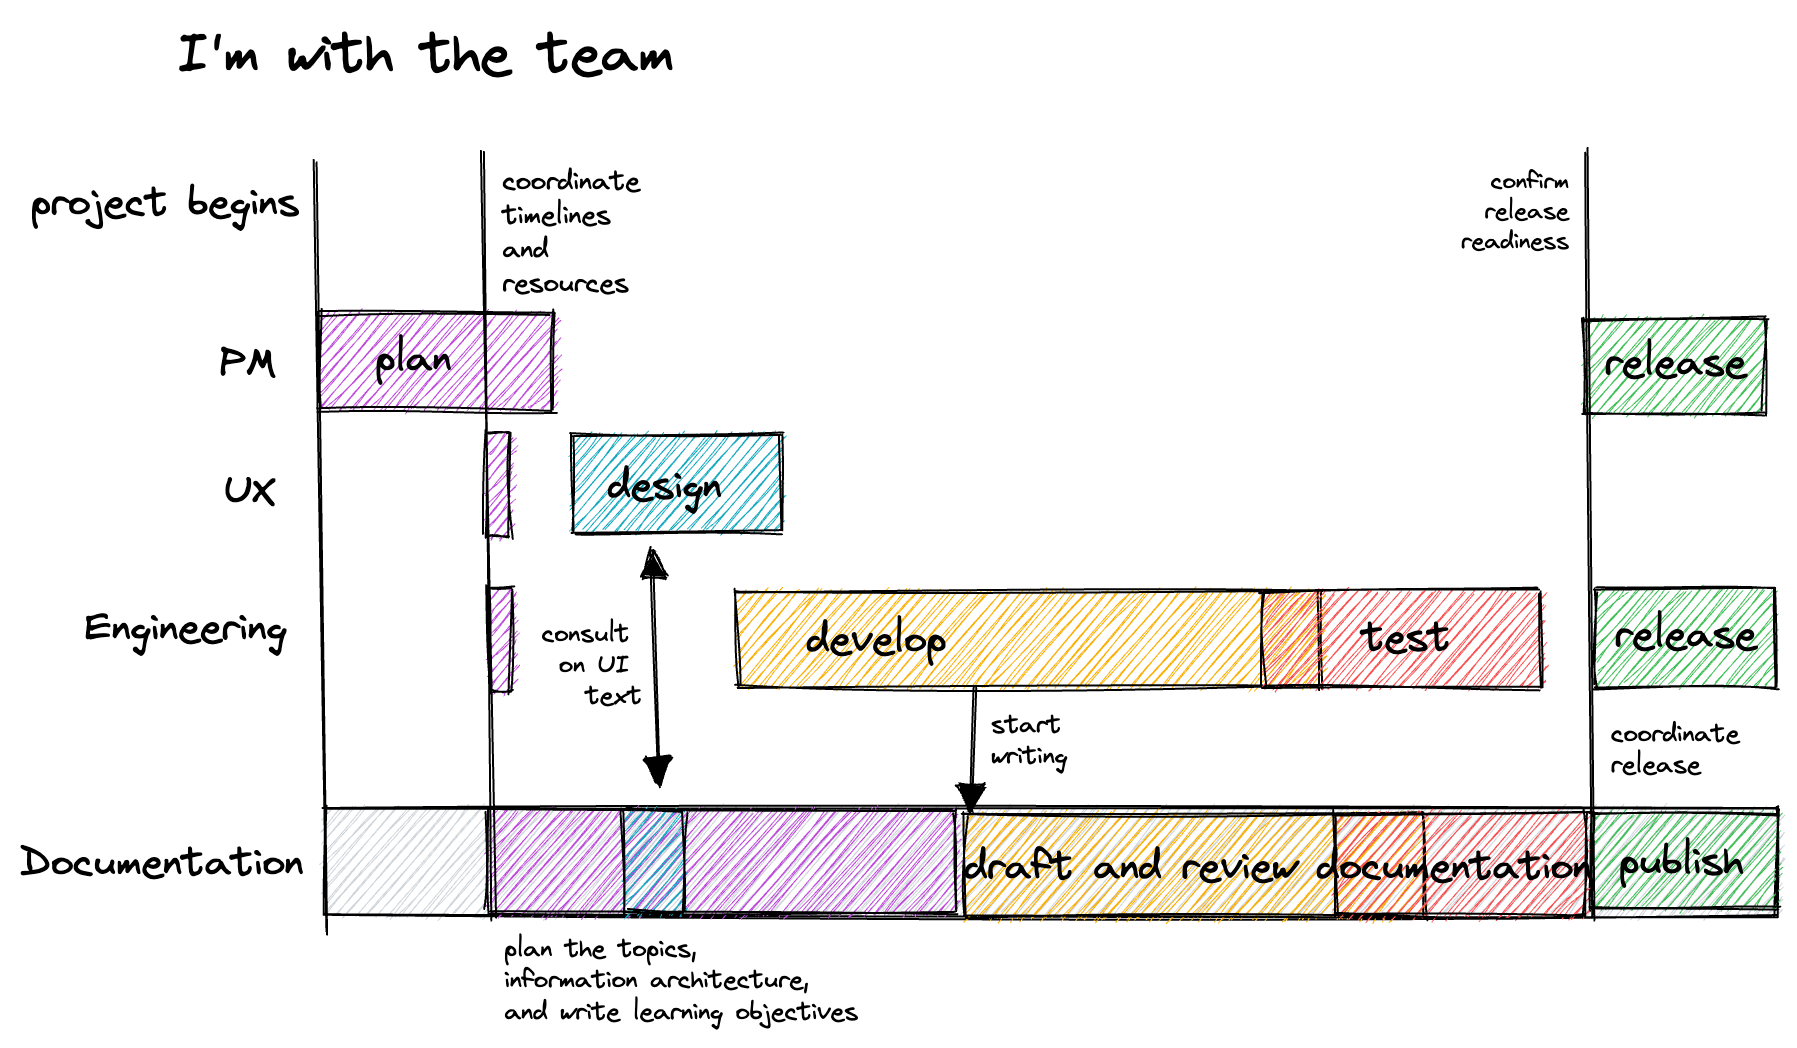 A timeline showing four different job duties, PM, UX, engineering, and documentation. PM starts planning, then design, docs, and engineering are brought in to plan at the same time. Designing starts and documentation collaborates on UI text, and development starts. When development is mostly complete, documentation drafting starts and is reviewed while the product is being tested. Then there’s a coordinated release across all teams.